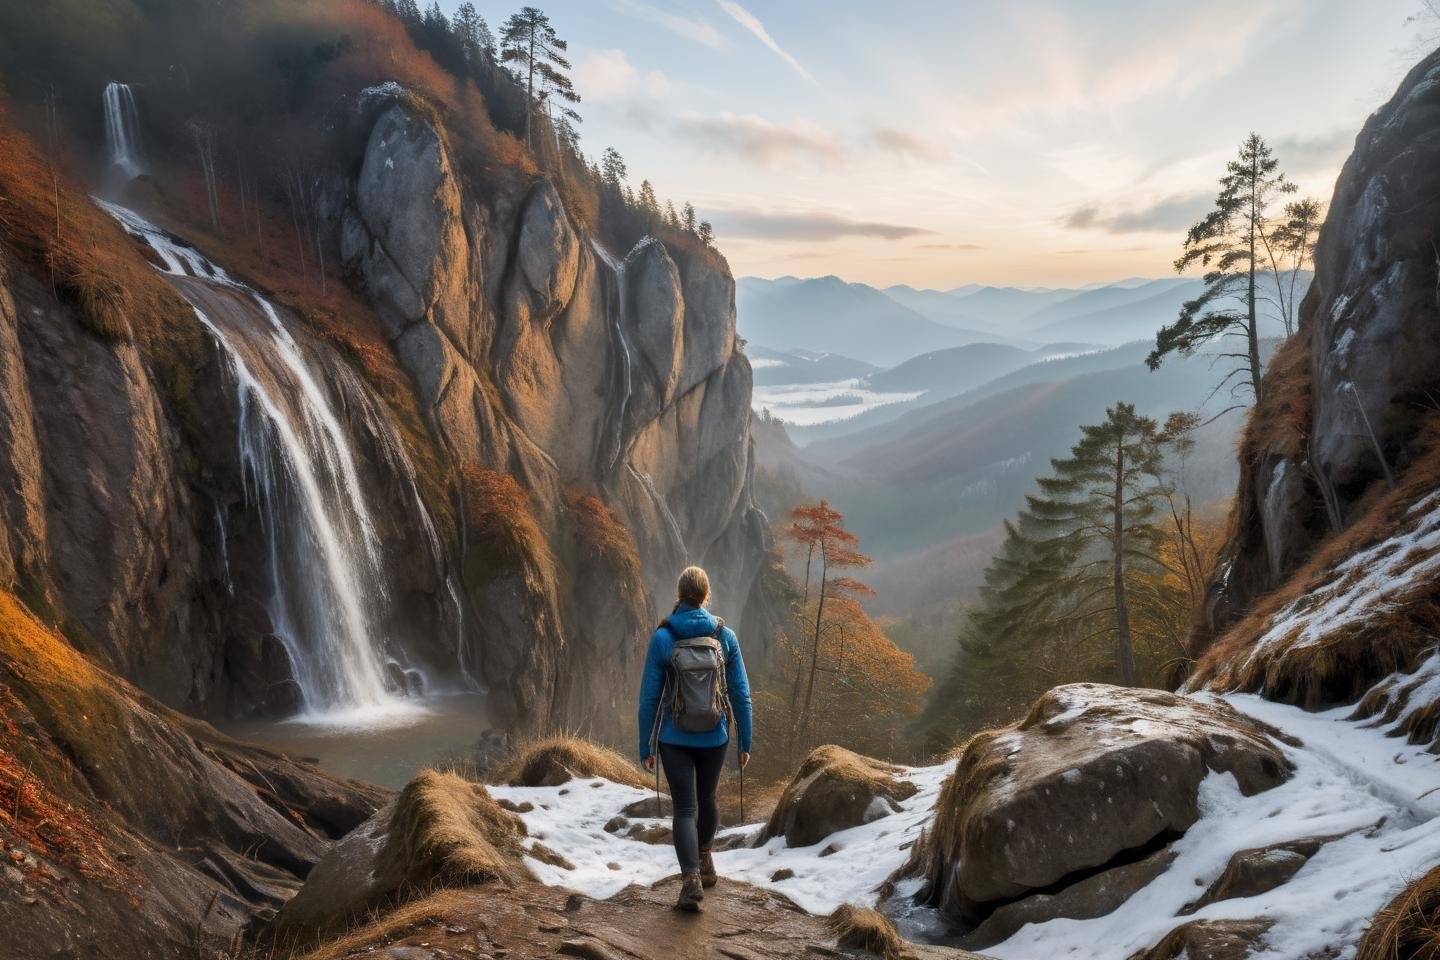 Hyperrealistic art professional photo, woman hiking in mountains,  autumn winter, scenery, path through cliffs up to hill to rock window, waterfall, forest, (dramatic sky,  journal cover shot, natural colors, correct white balance, color correction, dehaze,clarity),  . Extremely high-resolution details, photographic, realism pushed to extreme, fine texture, incredibly lifelike   <lora:When_autumn_meets_winter_XL:1>